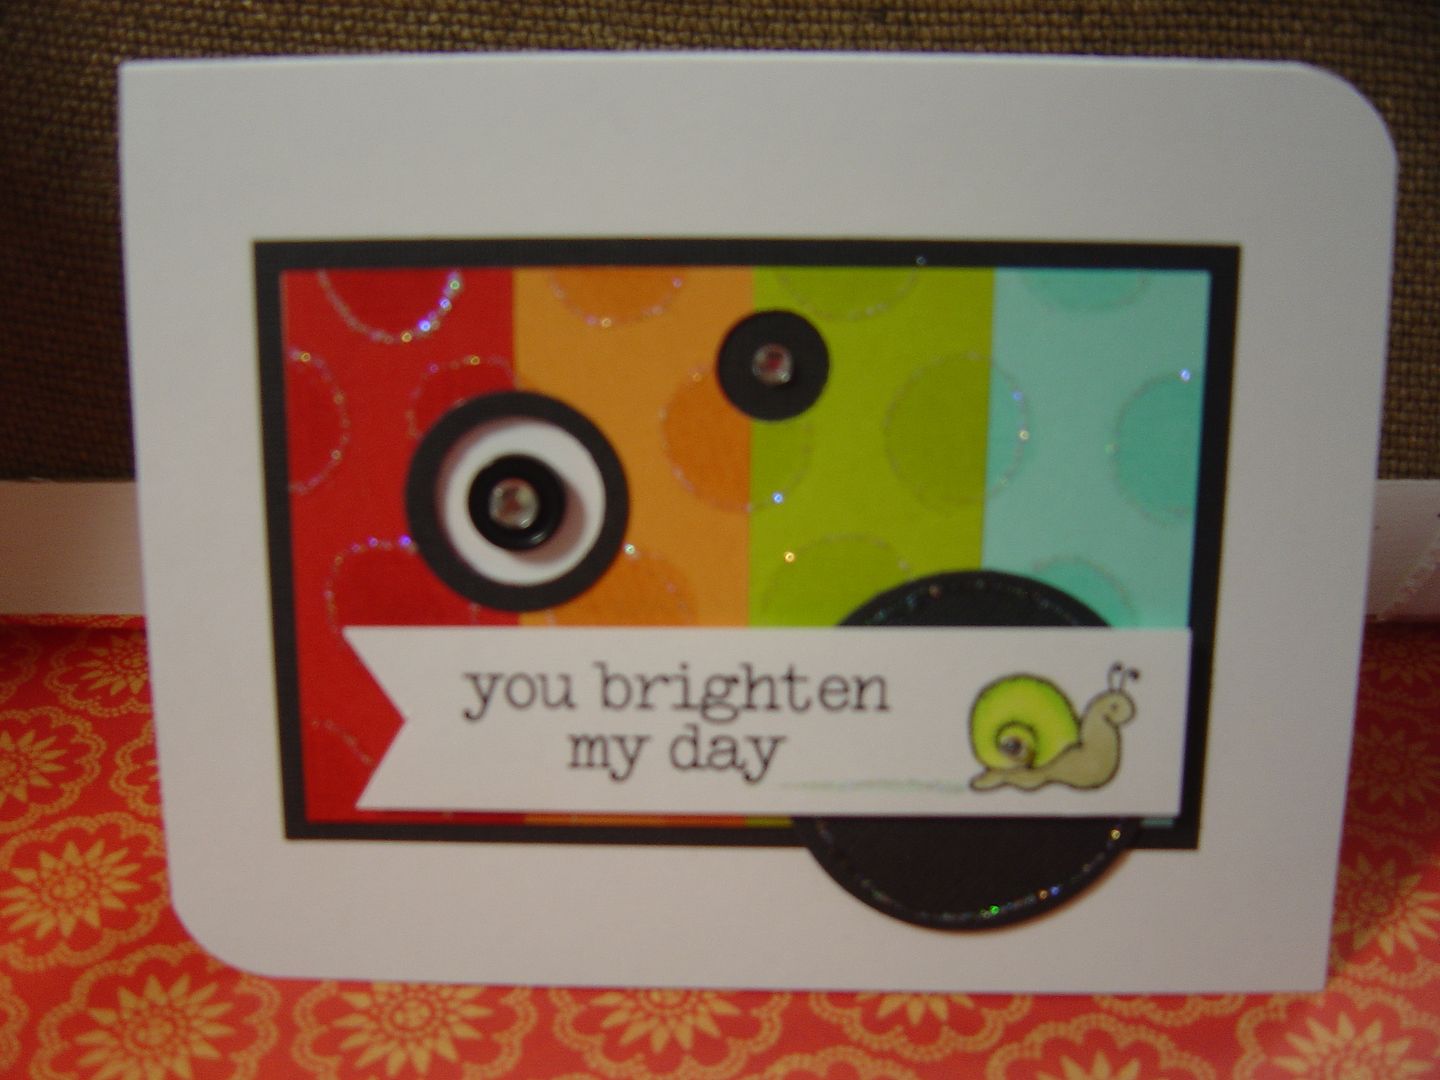 Laura's card